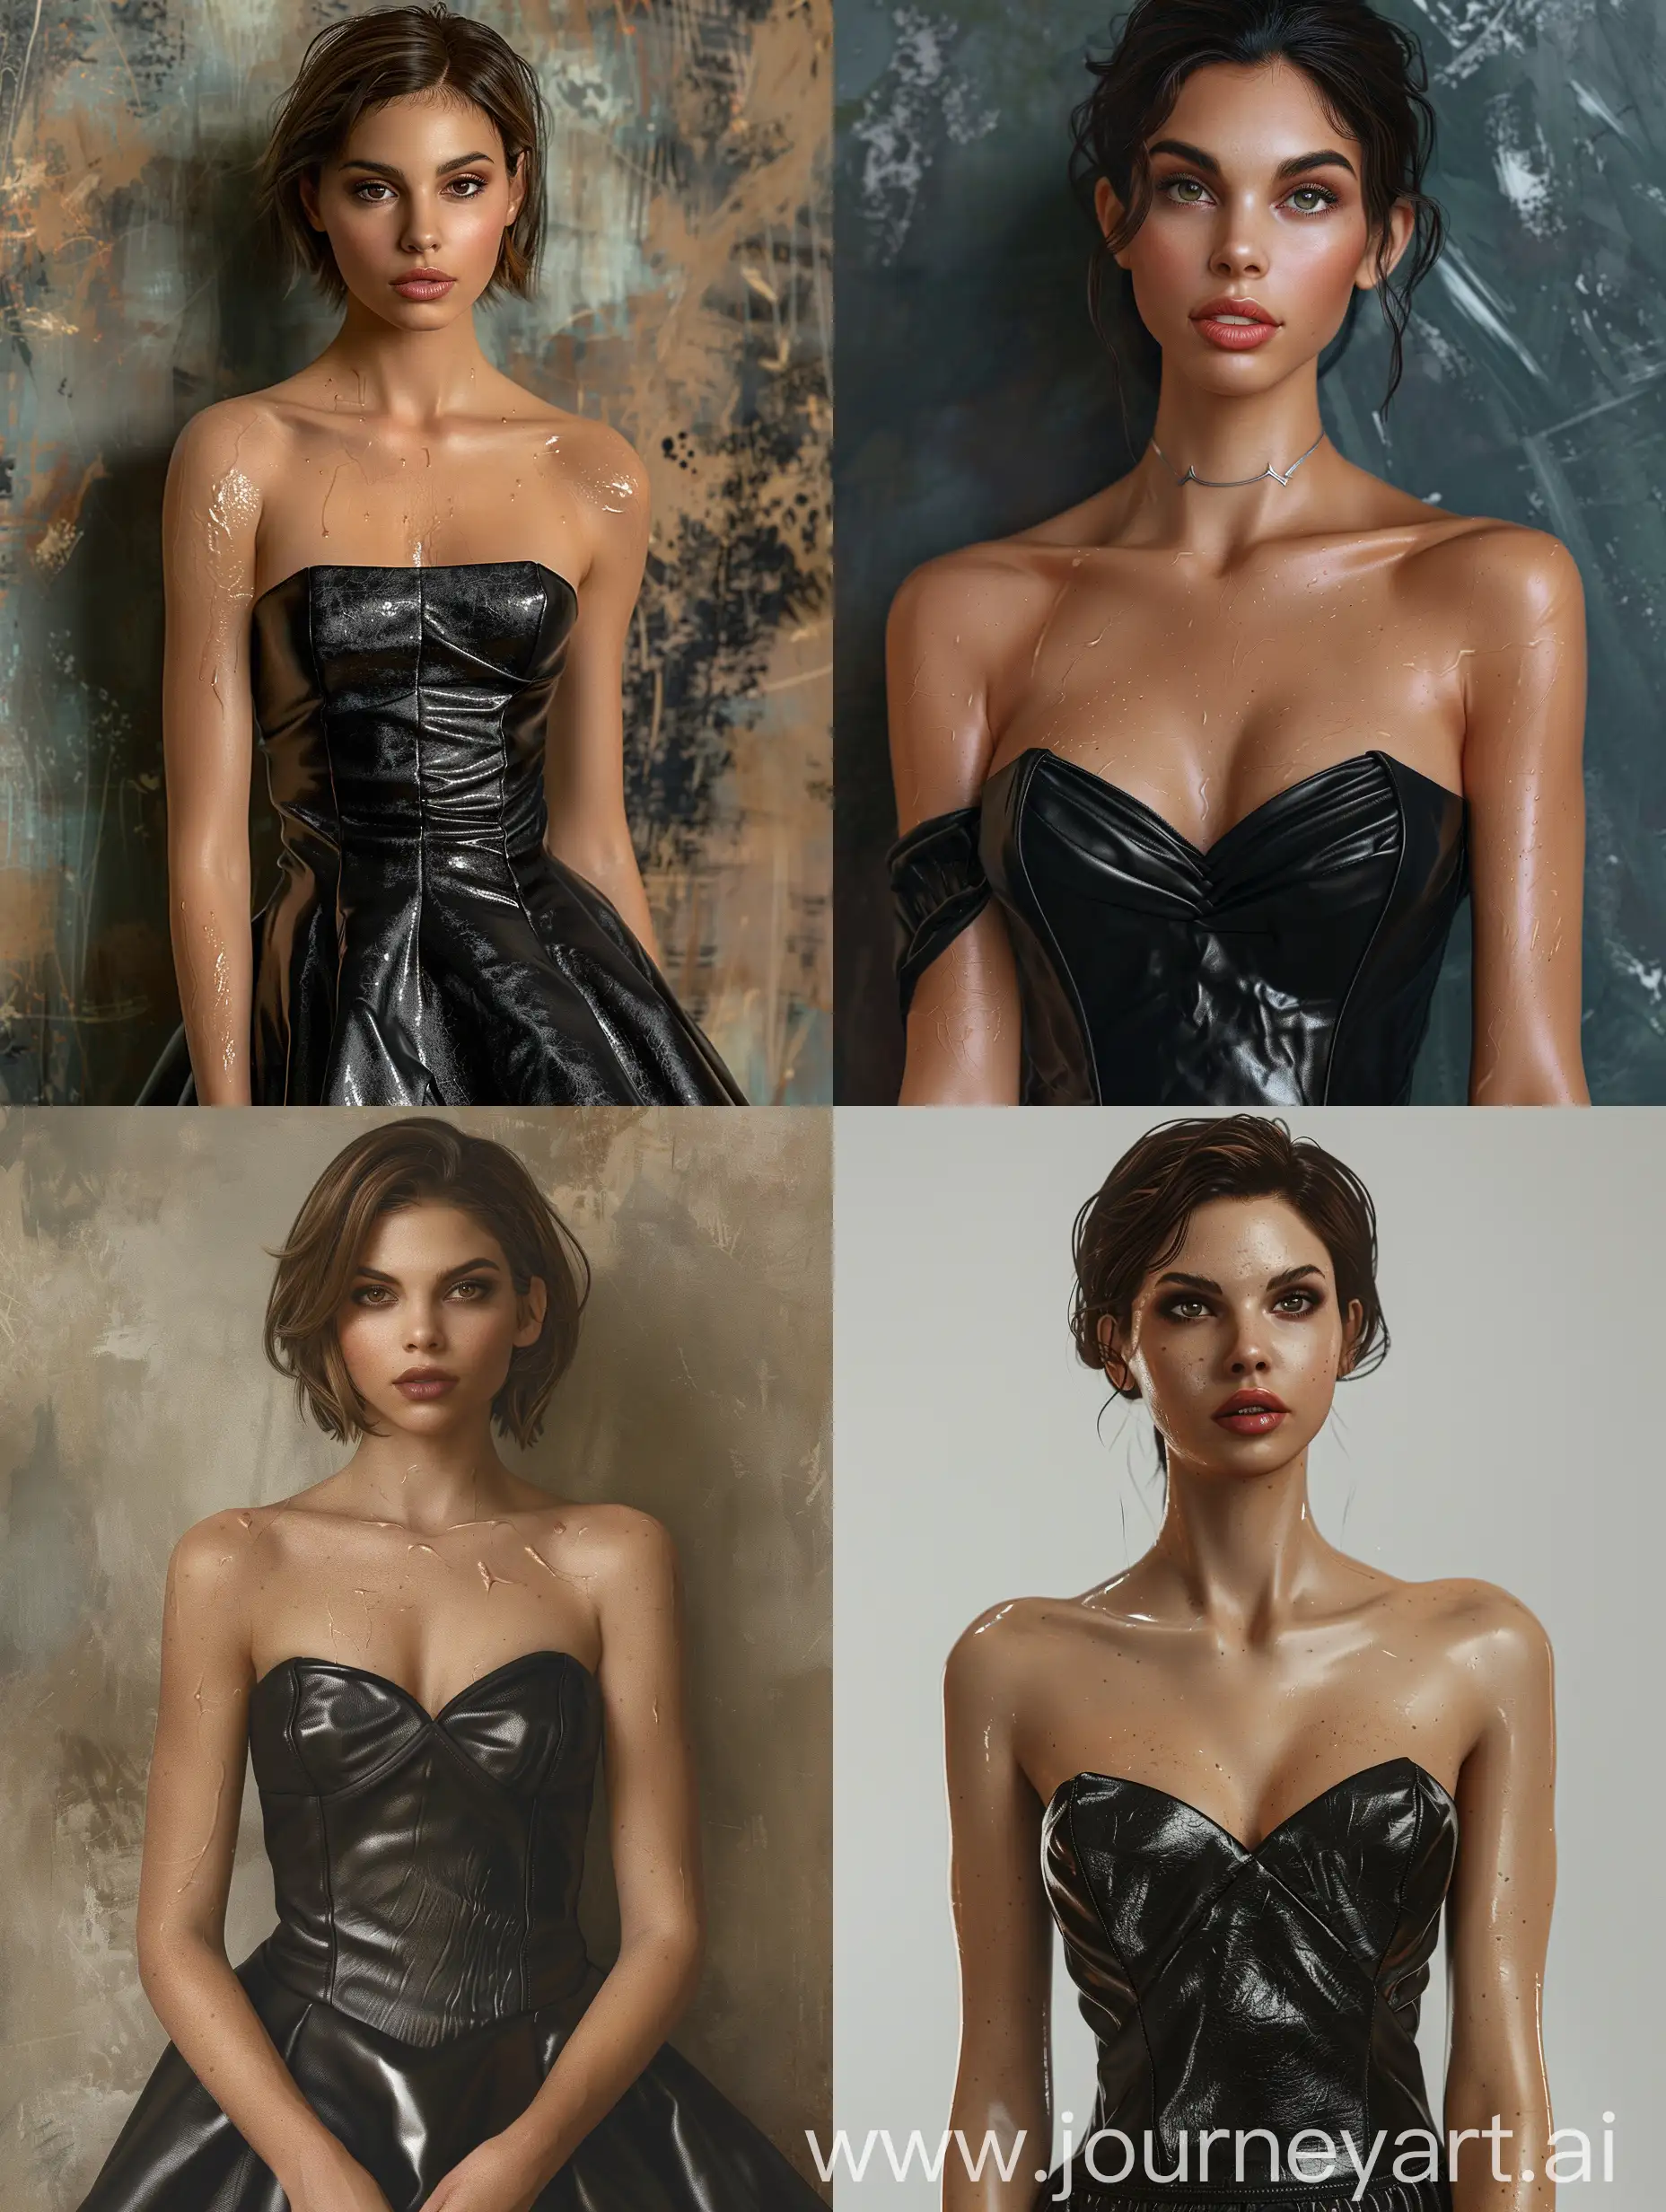 Victoria-Justice-Stunning-in-Black-Leather-Strapless-Dress-Photorealistic-Portrait-with-Detailed-Skin-Texture-and-HDR-Effect